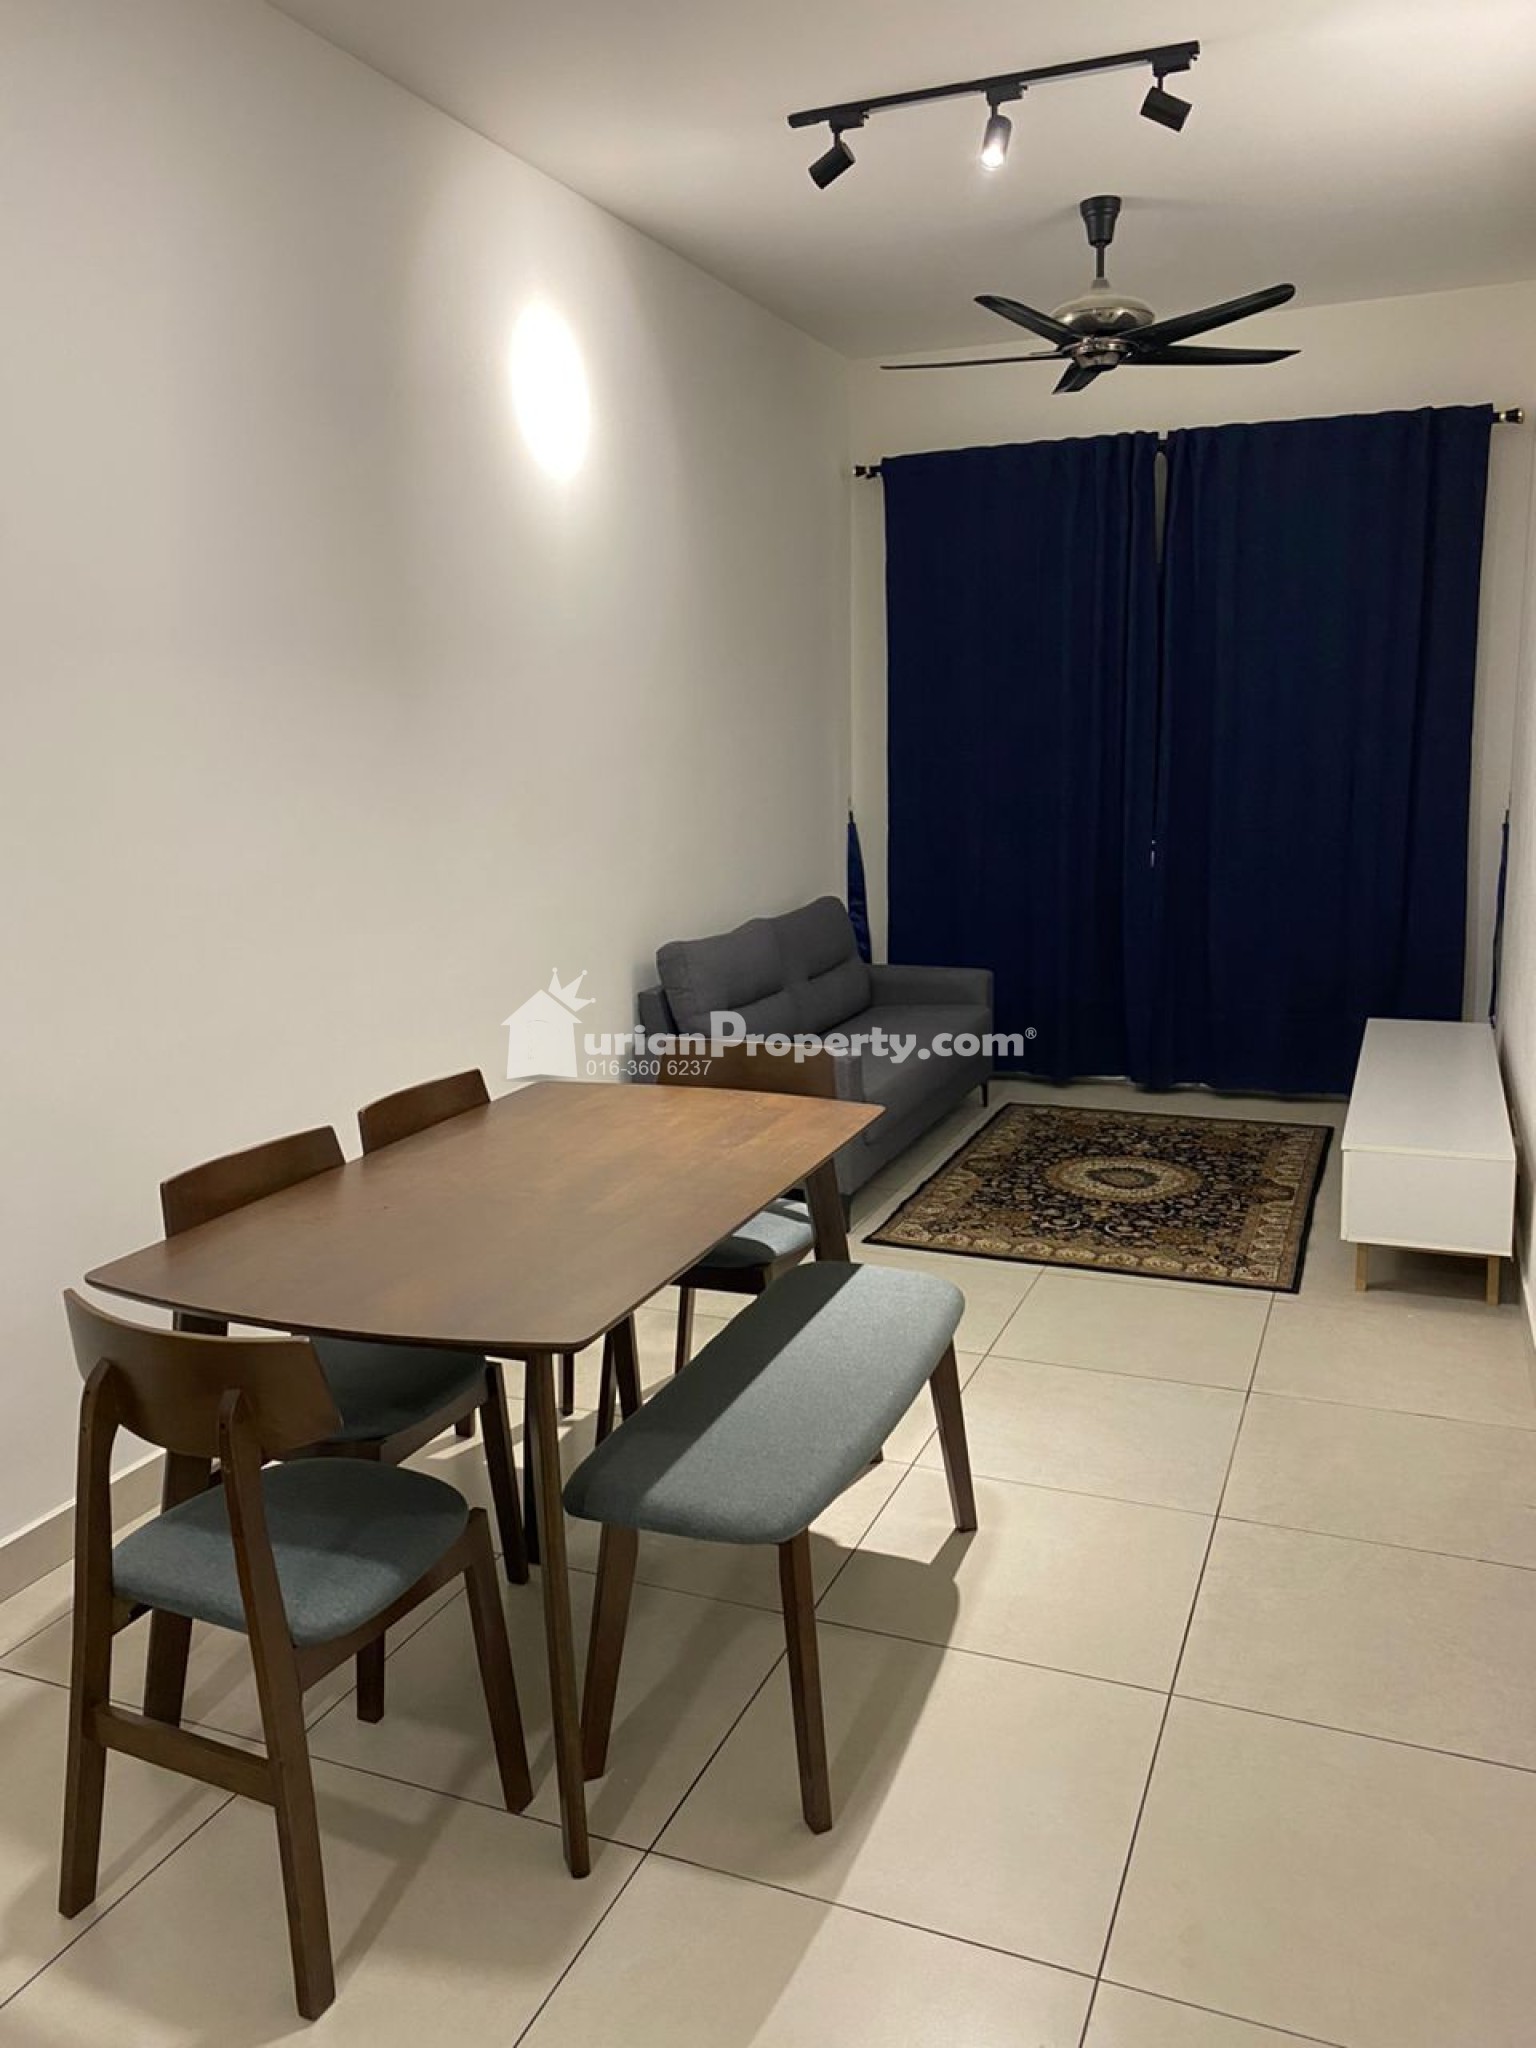 Condo For Rent at Canopy Hills